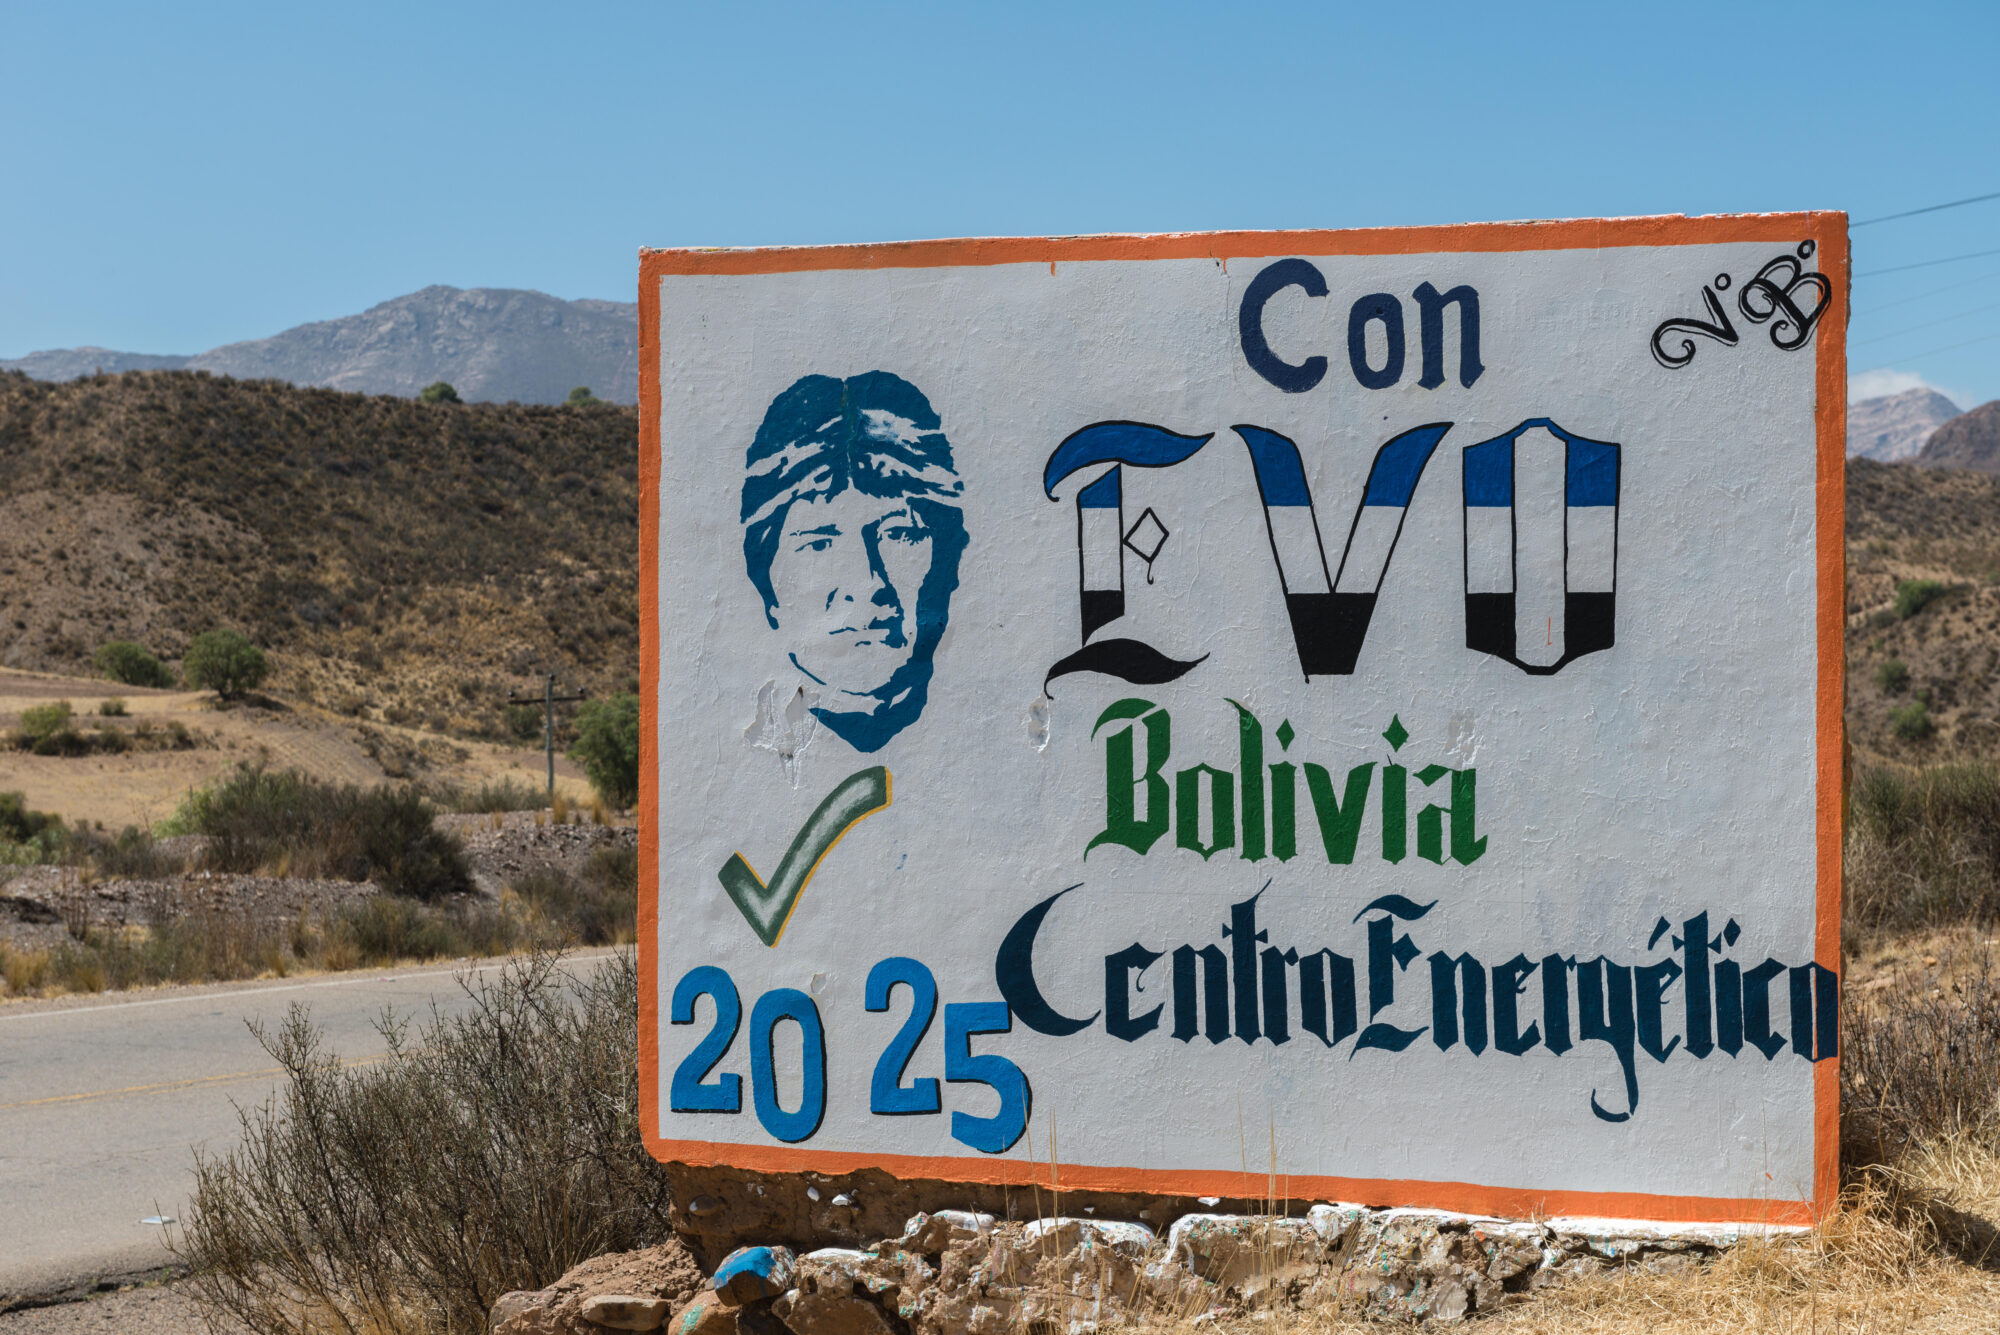 Poster with the face of Evo Morales and the legend "With Evo Bolivia energy centre 2025".